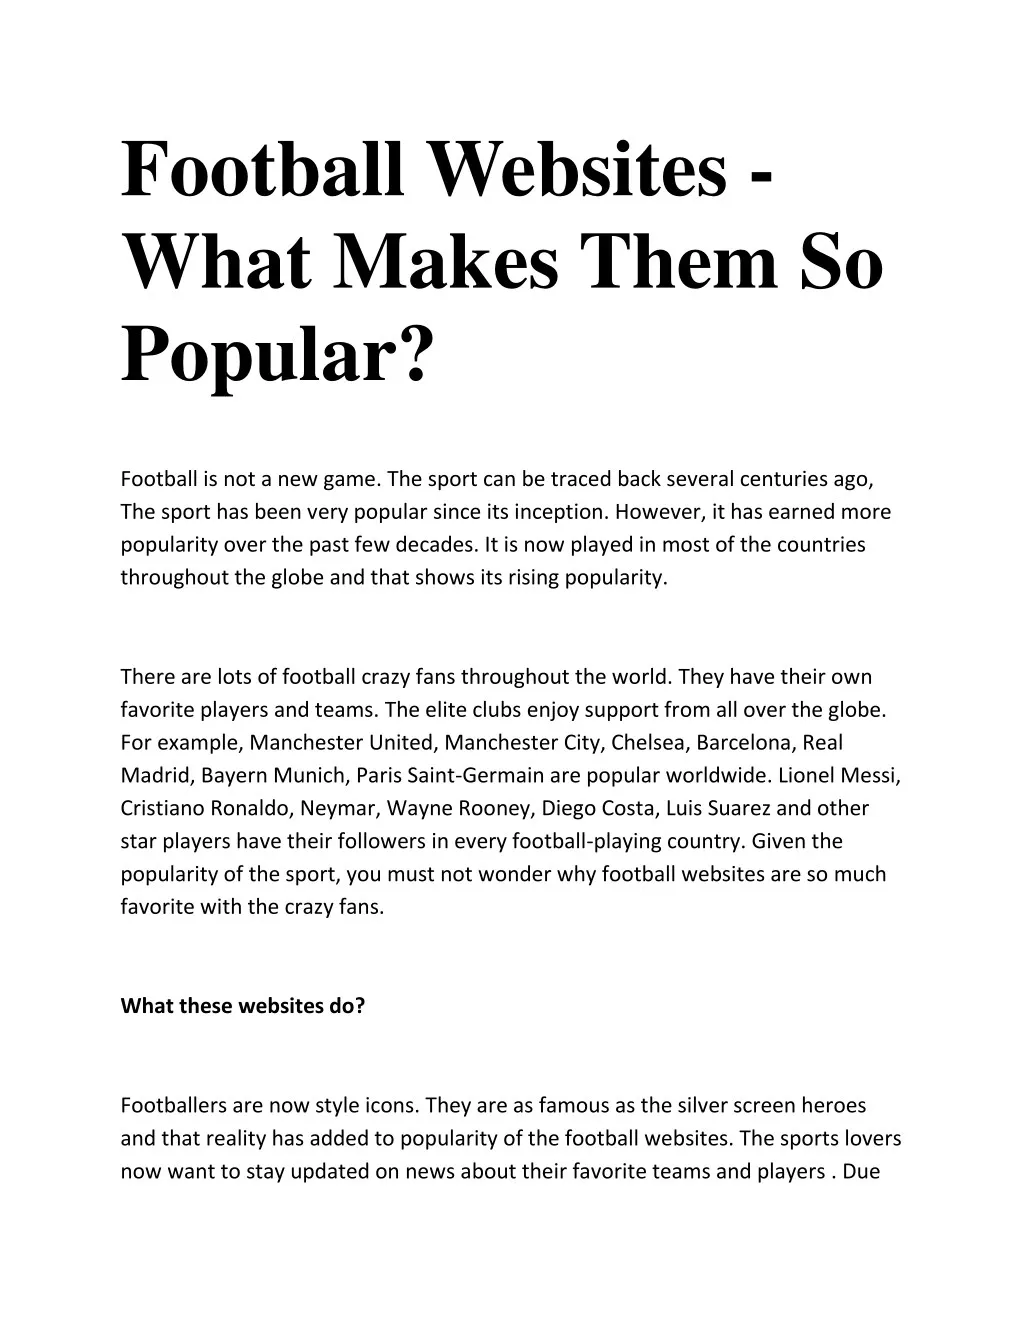 football websites what makes them so popular